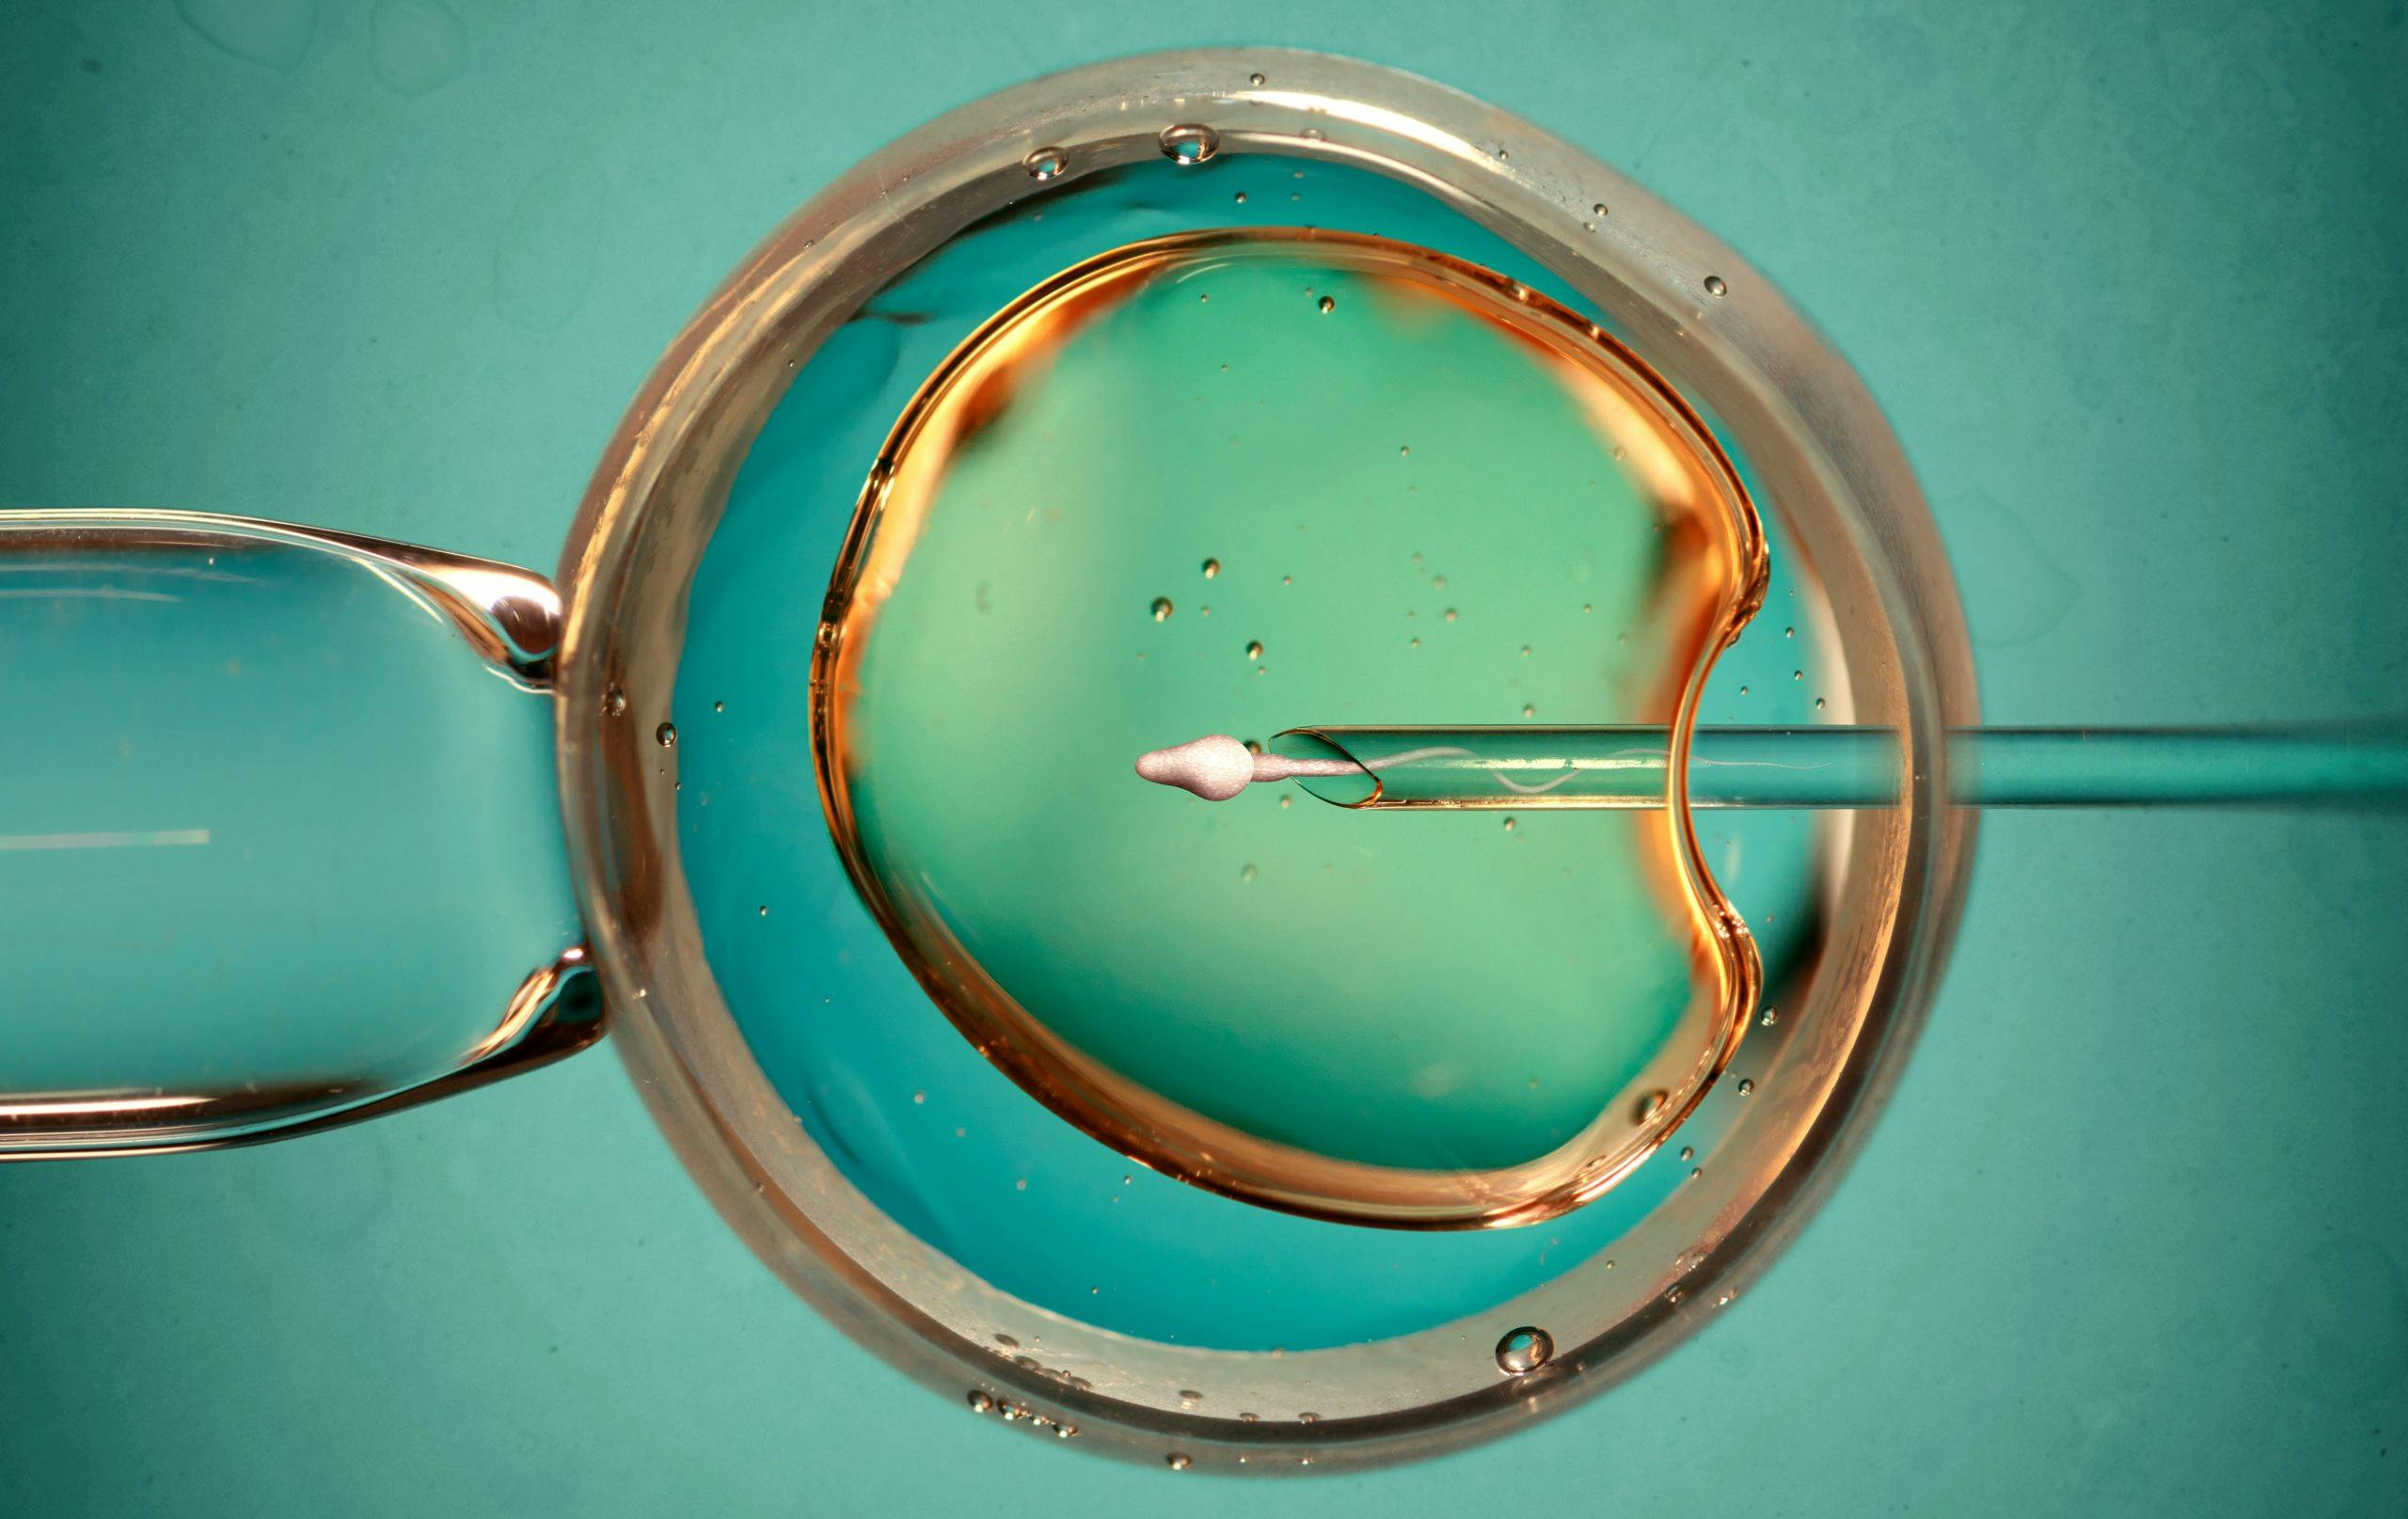 IVF method used during treatment of the infertility